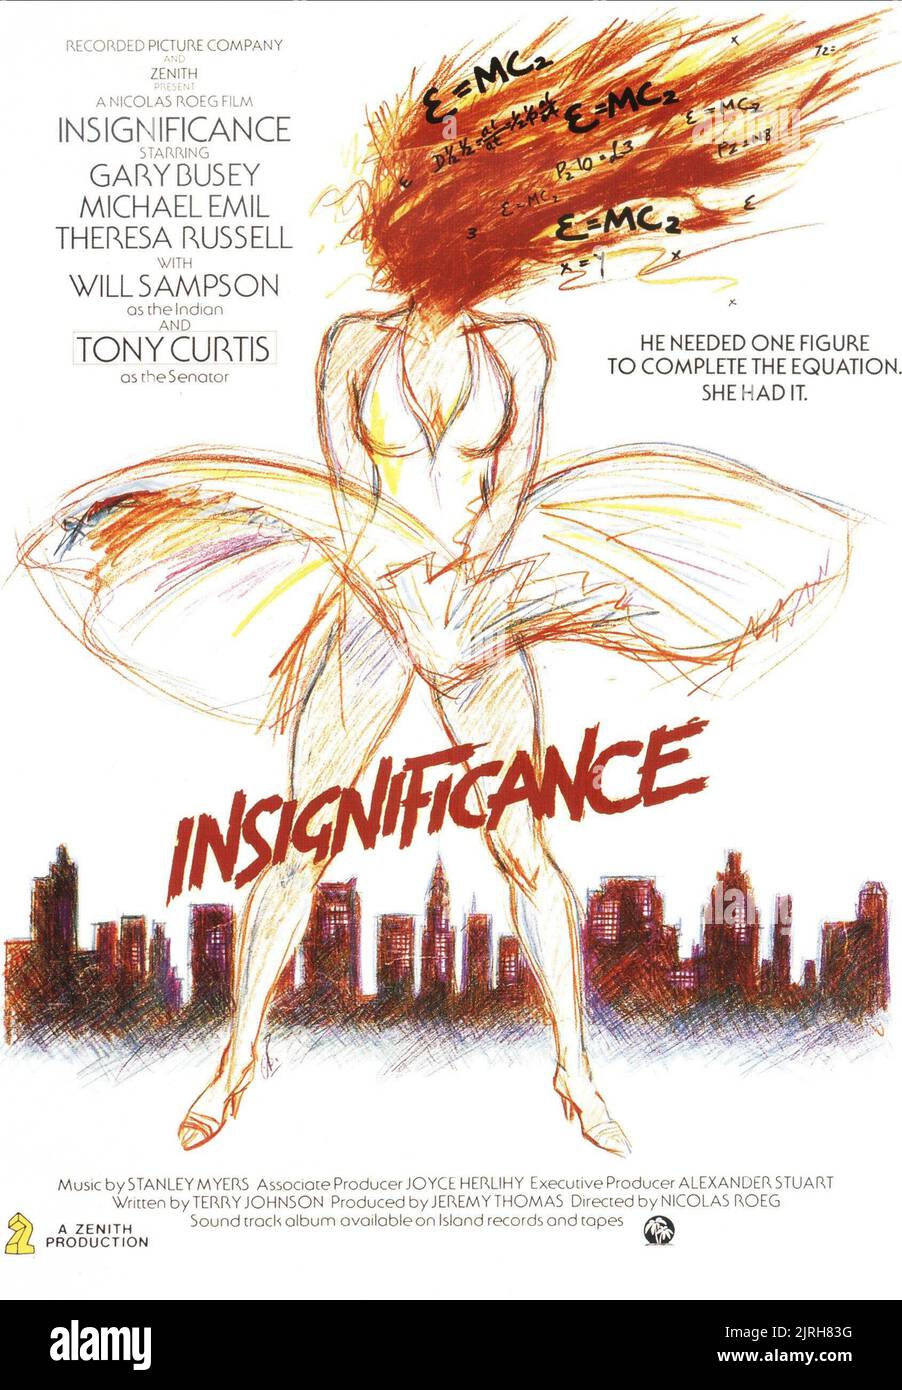 MOVIE POSTER, INSIGNIFICANCE, 1985 Stock Photo